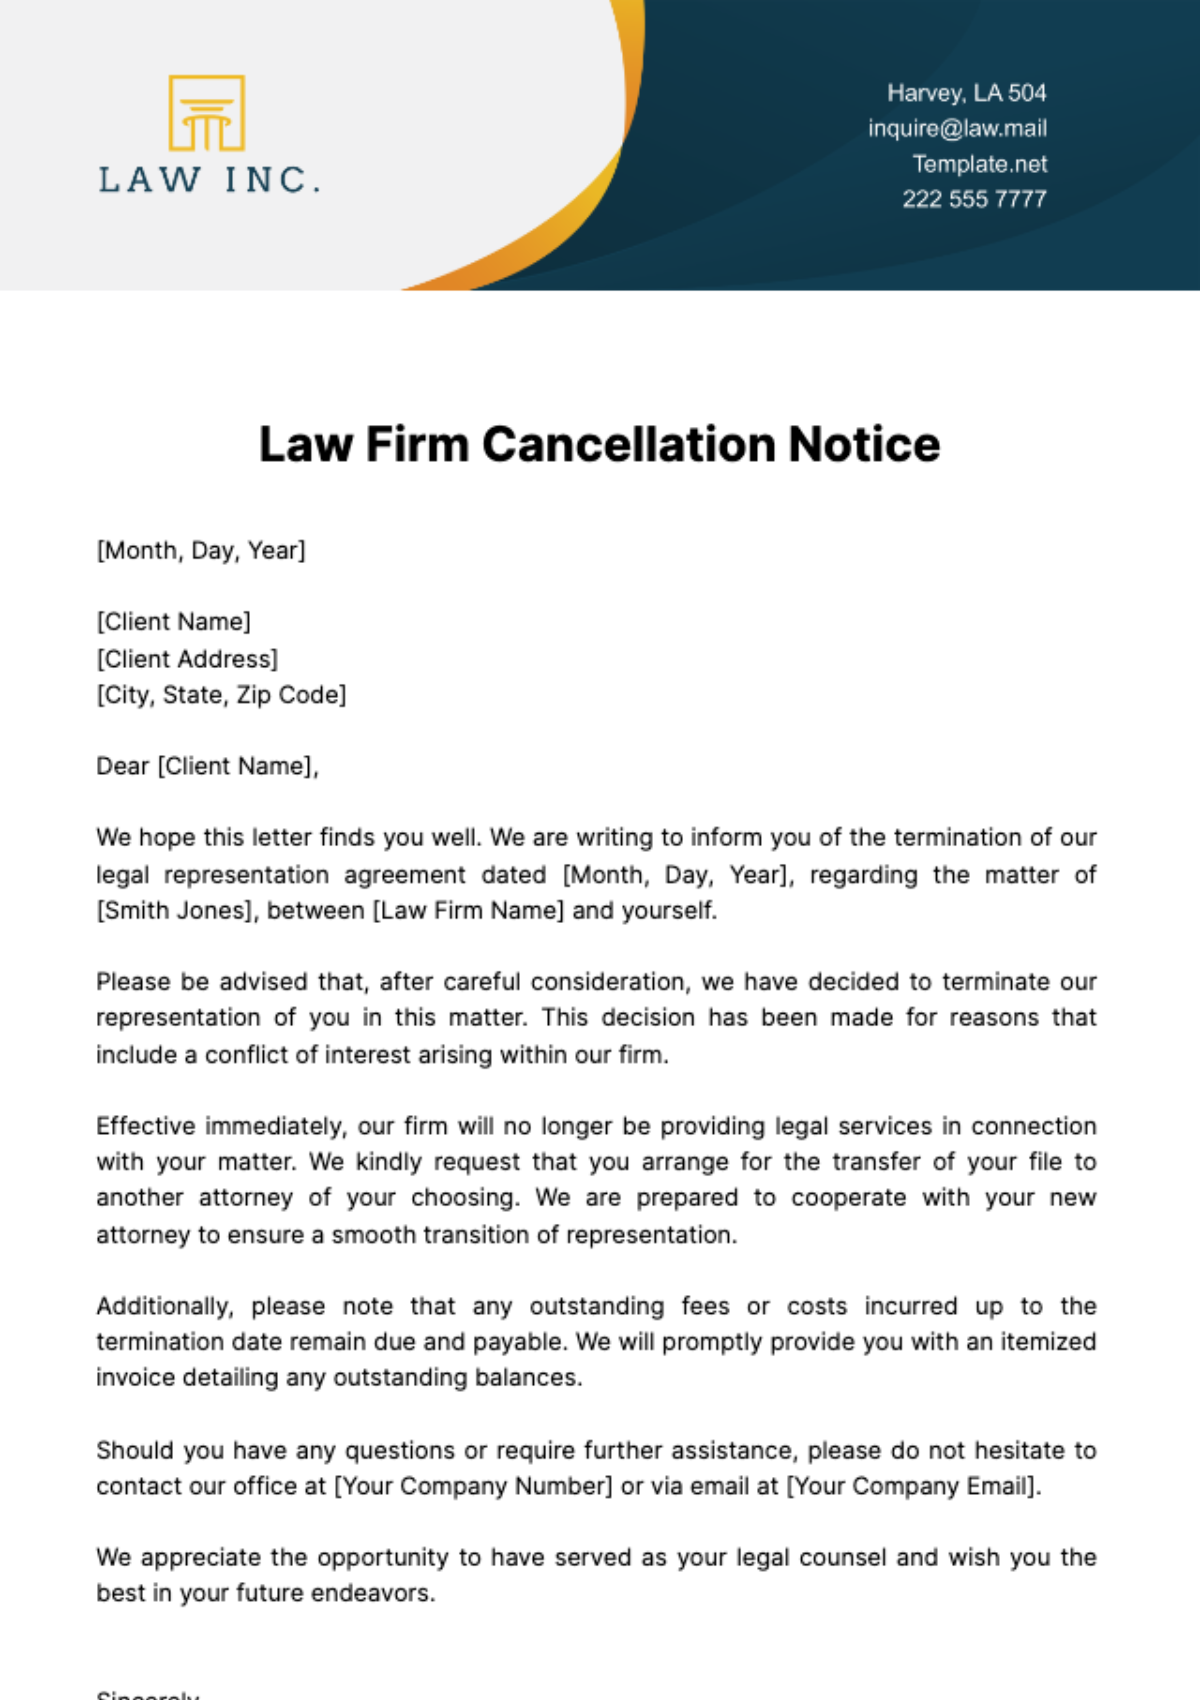 Law Firm Cancellation Notice Template